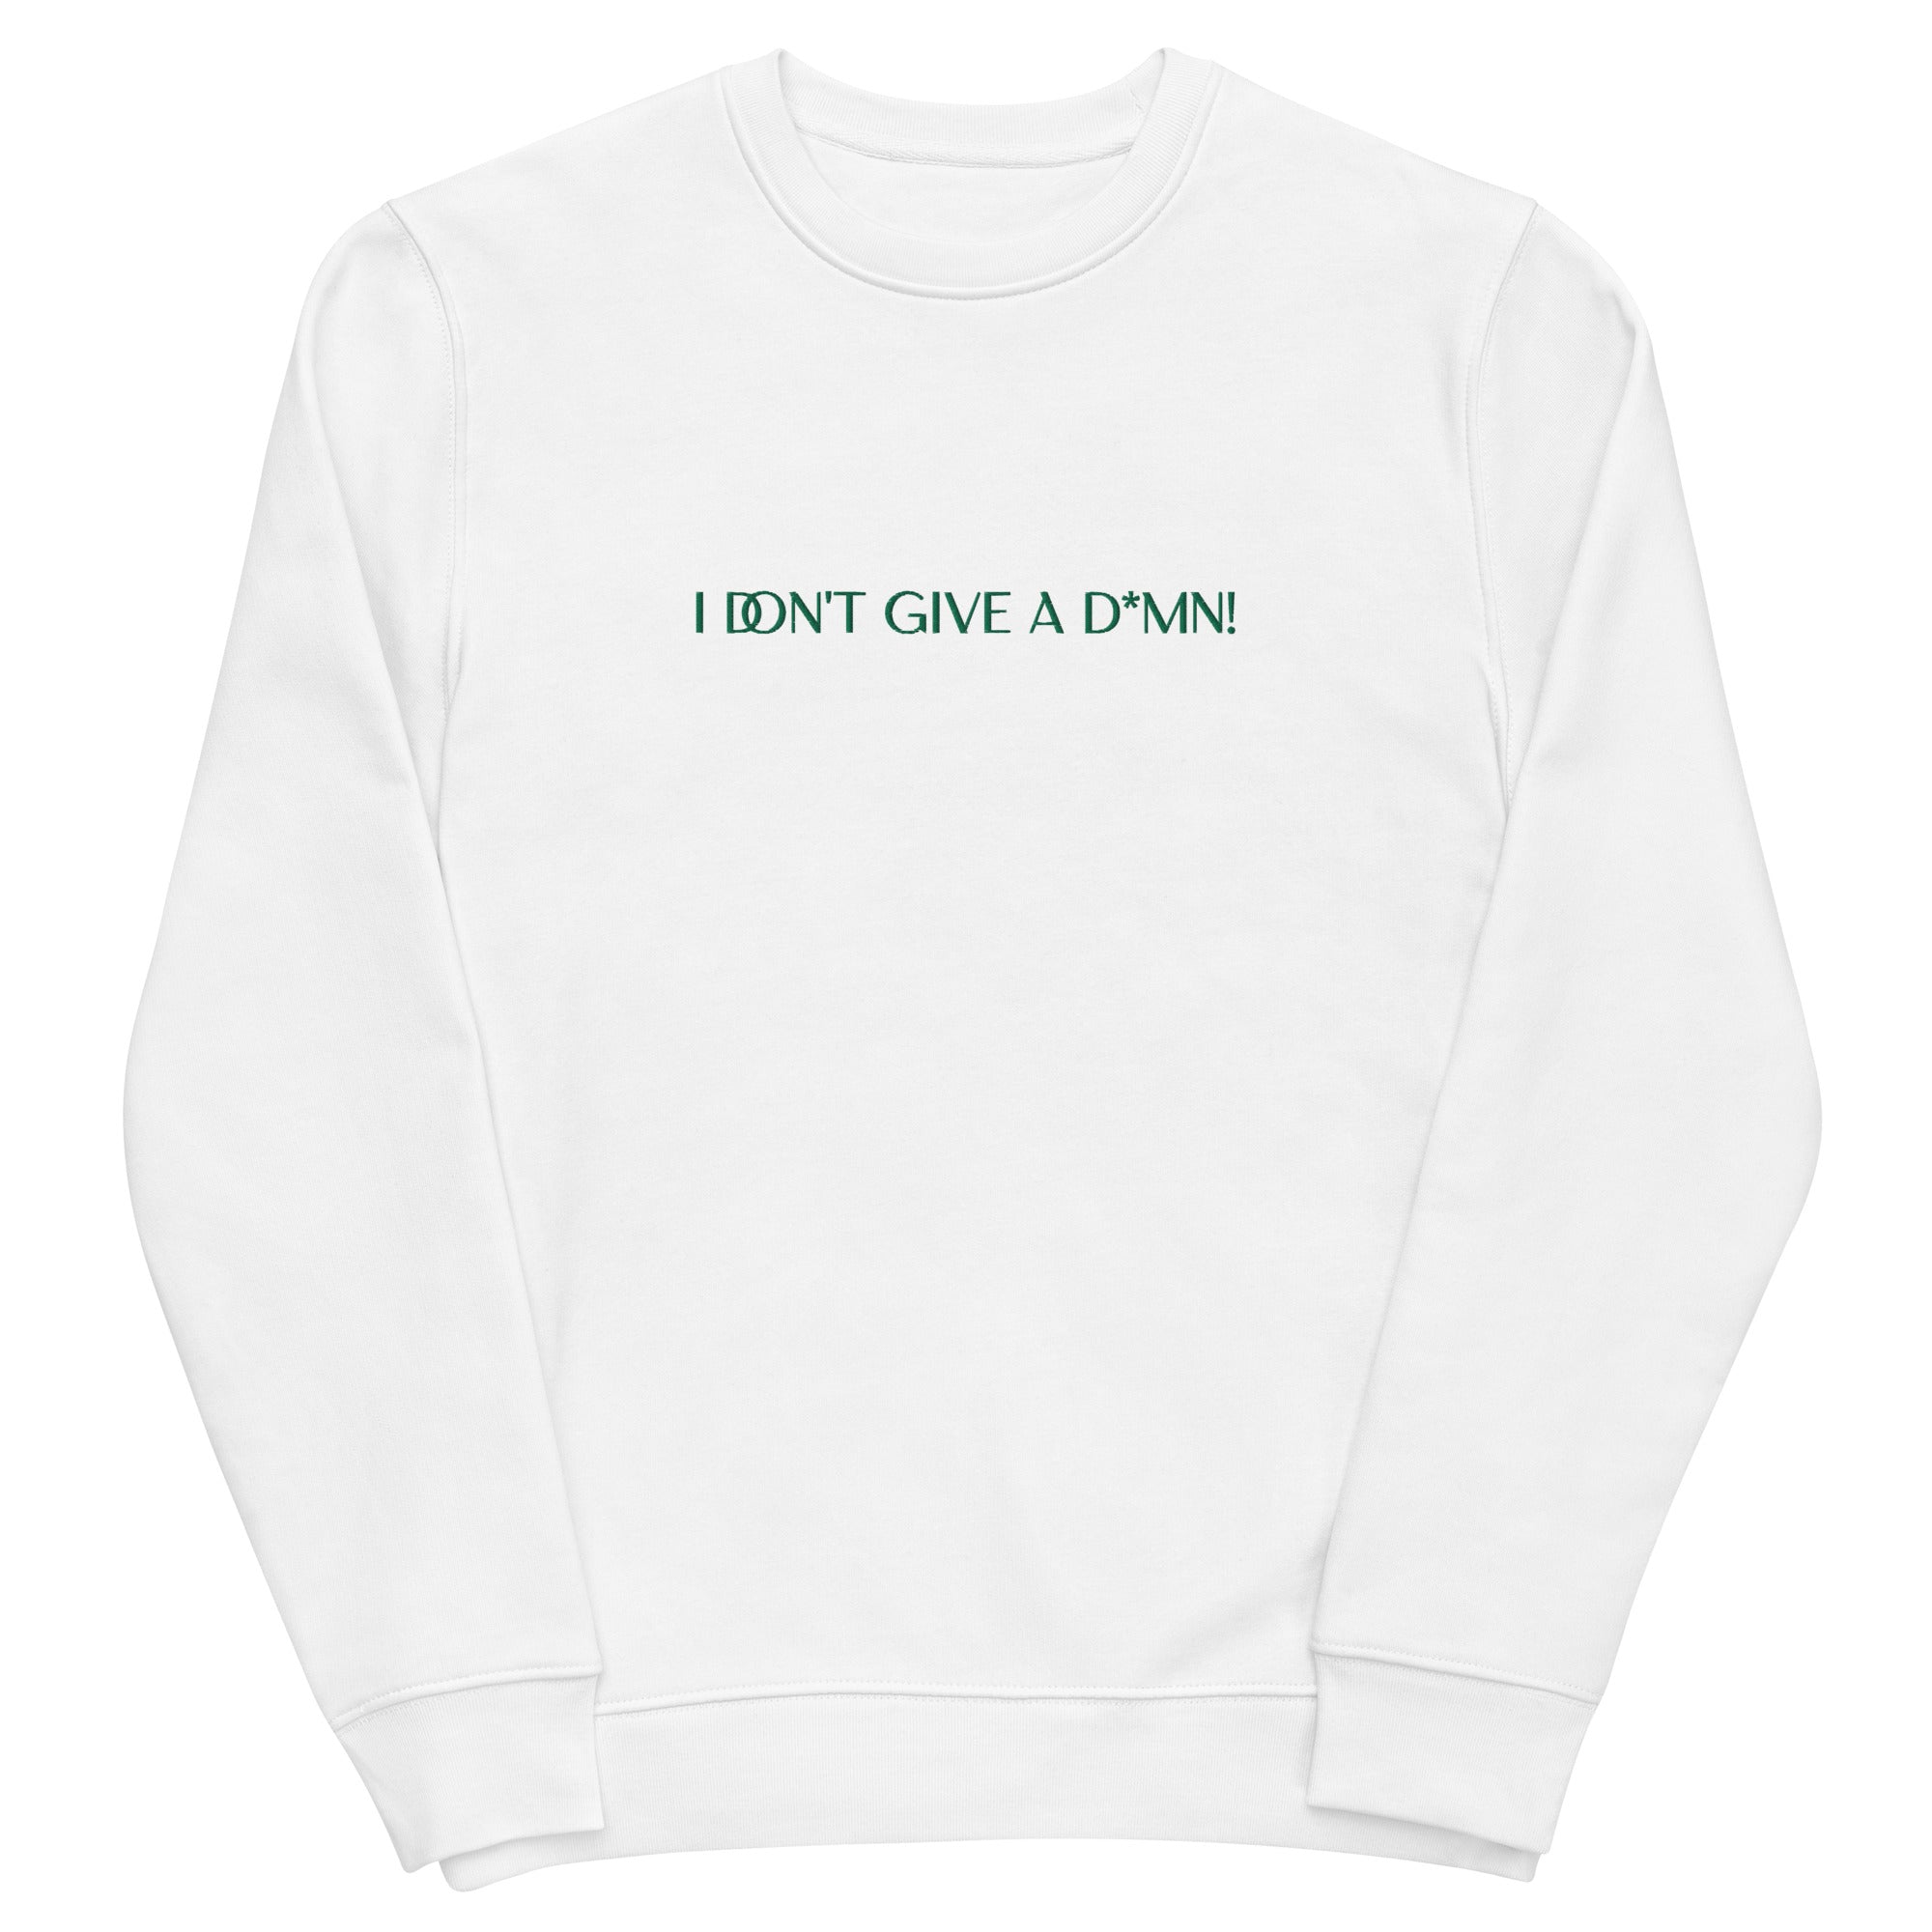 I DON'T GIVE A D*MN GREEN Unisex eco sweatshirt